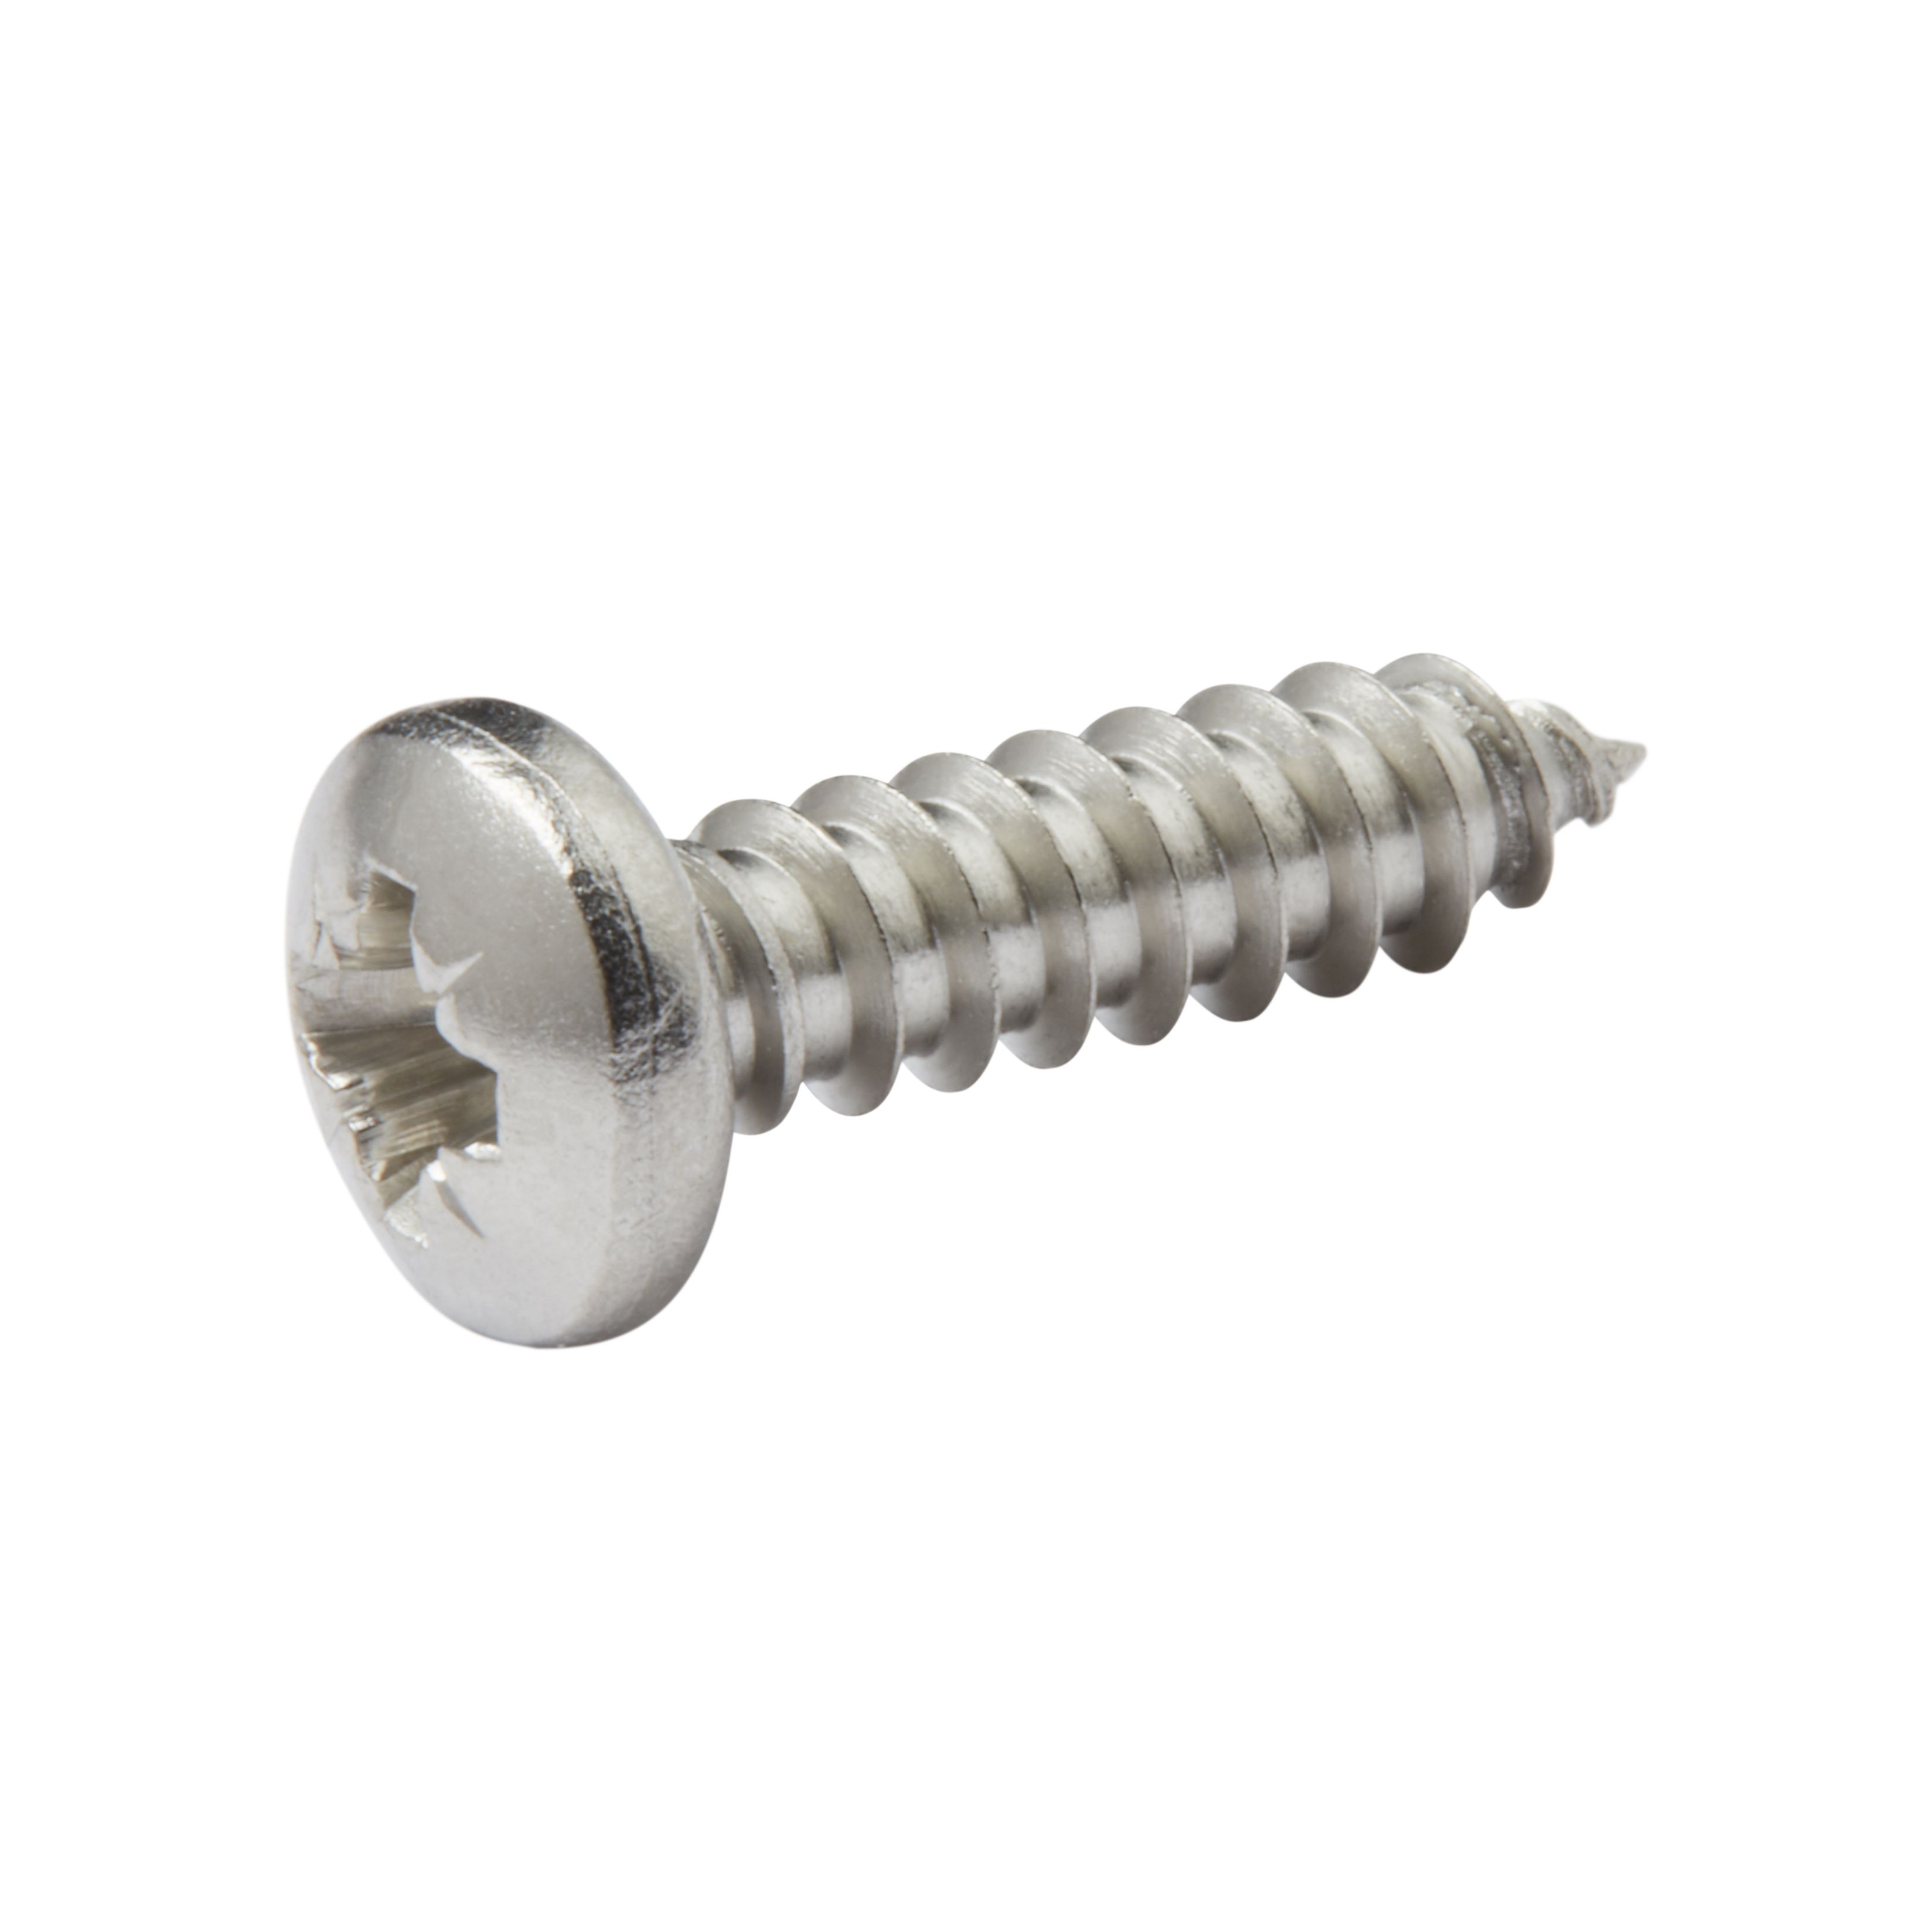 Diall Pozidriv Pan head Stainless steel Screw (Dia)4.2mm (L)16mm, Pack of 25